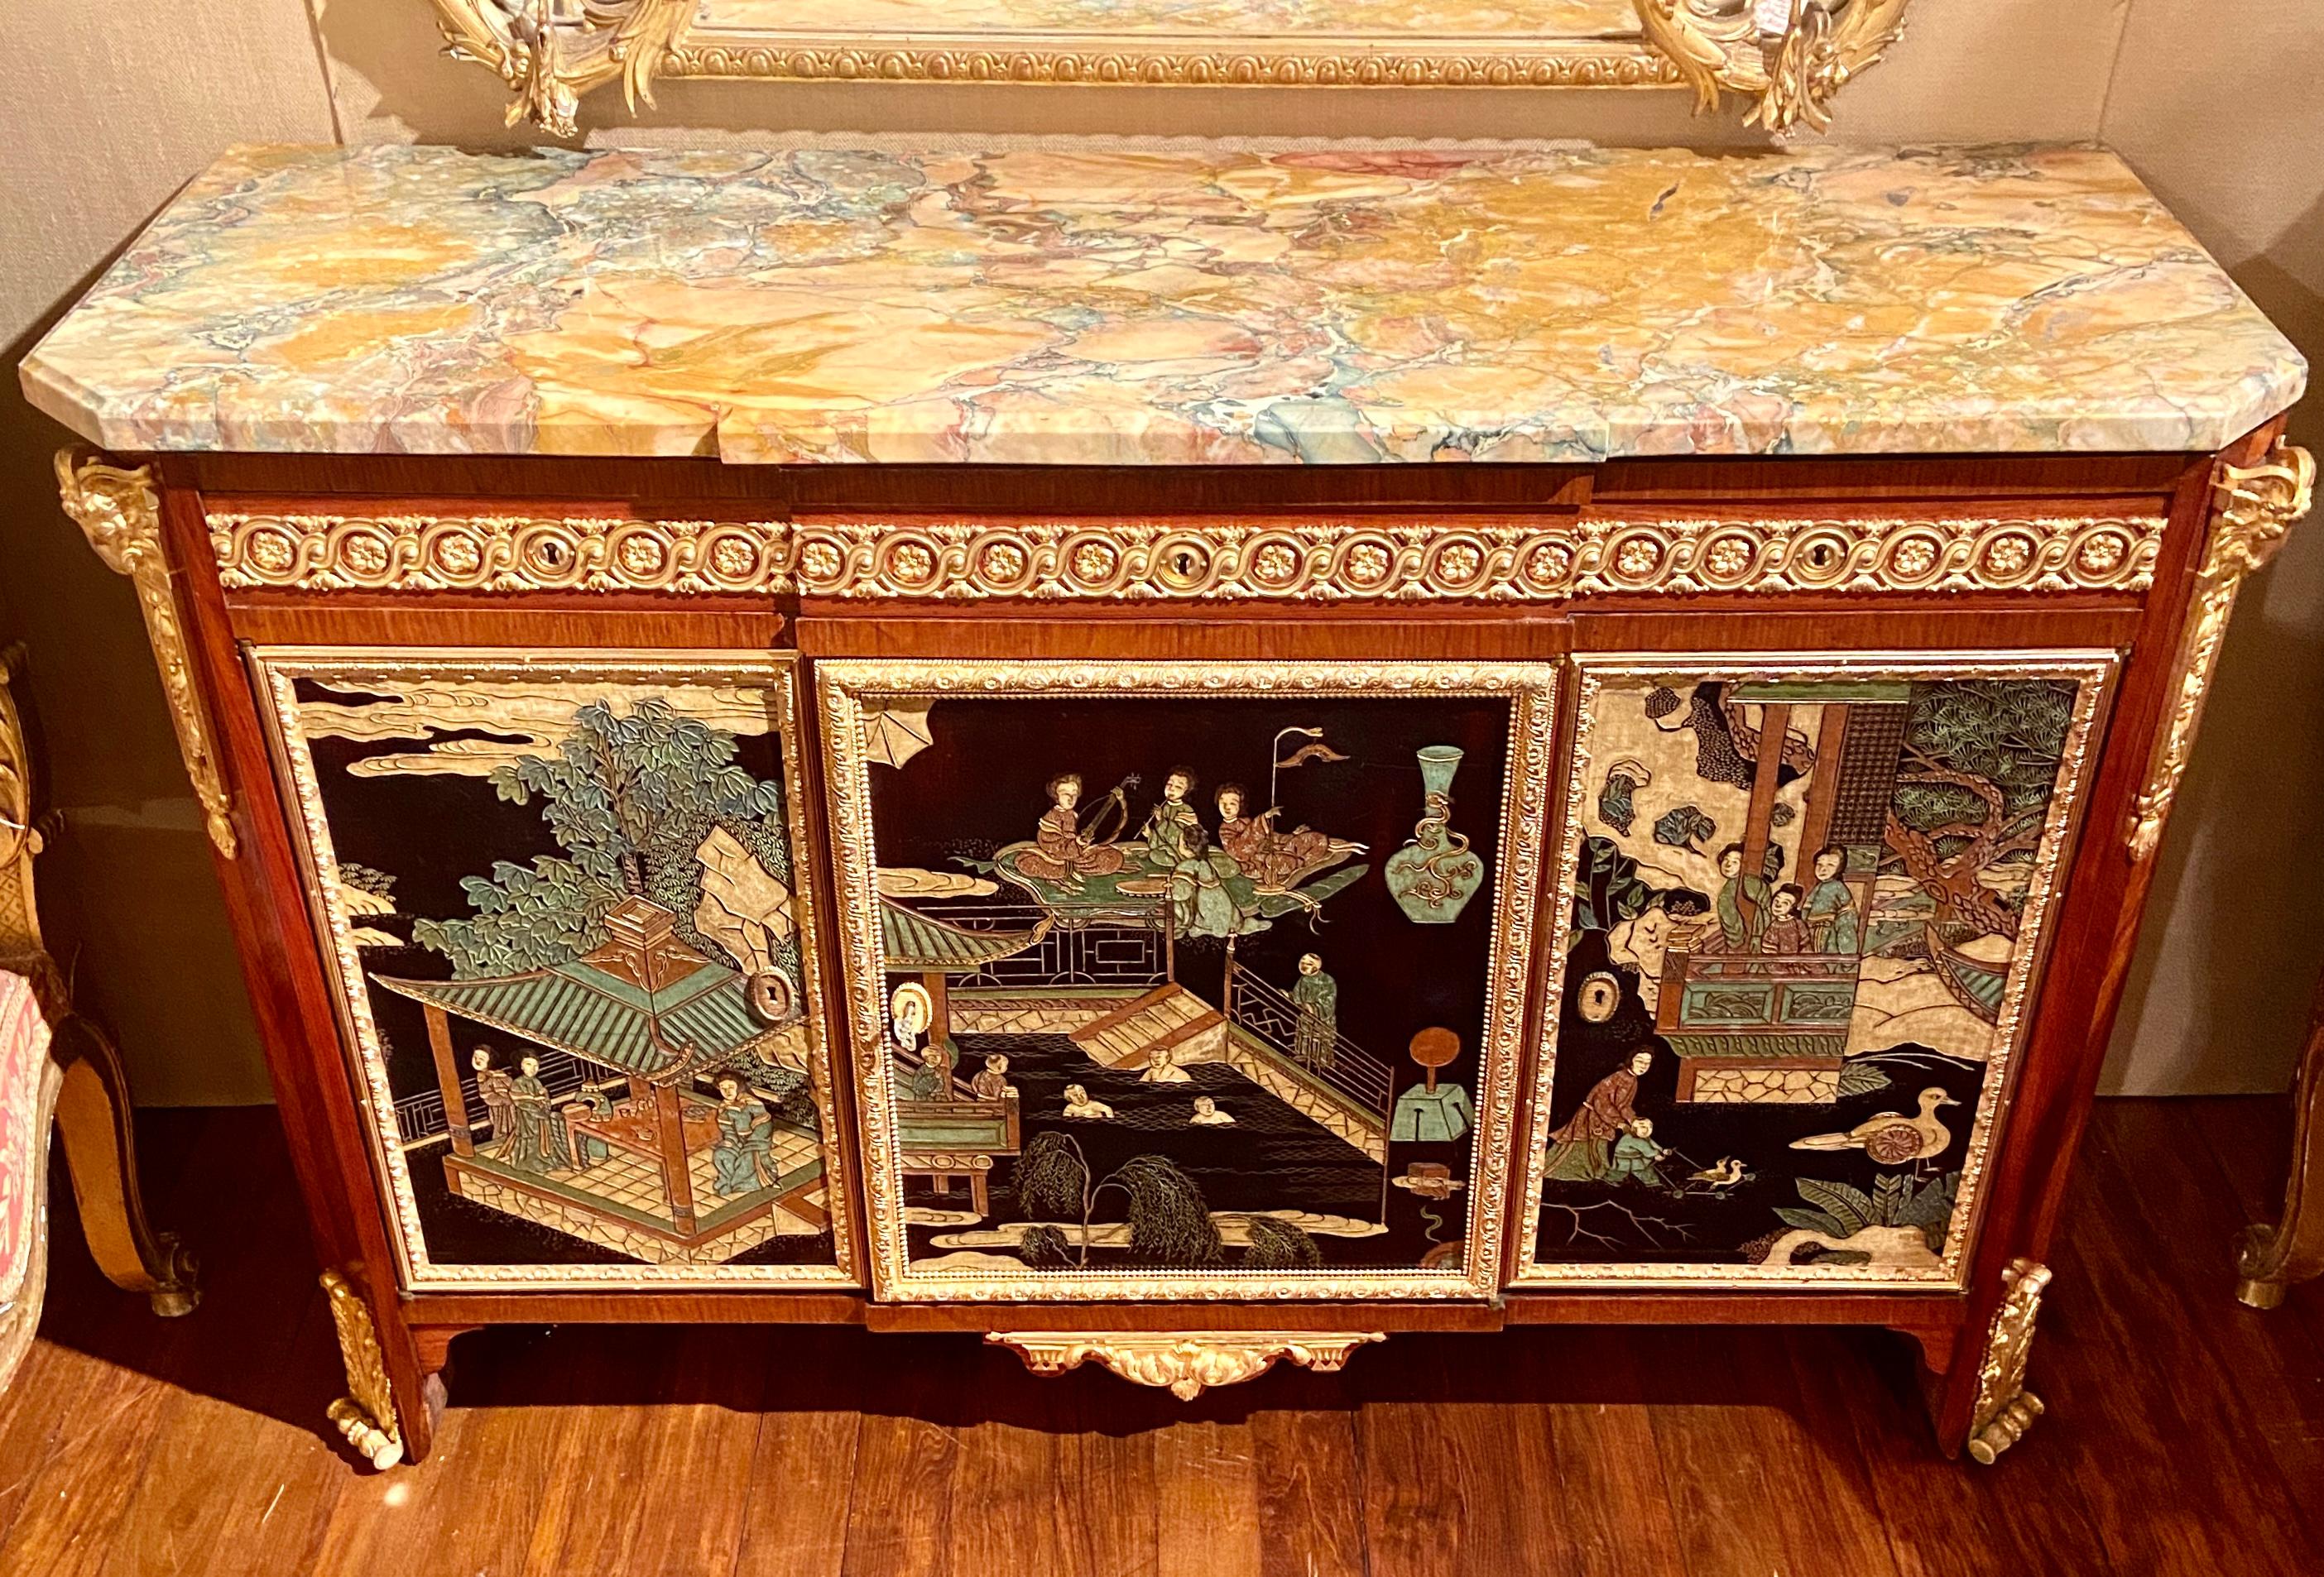 Exquisite antique French Chinoiserie Lacquer commode with multi-colored marble top and bronze D' Ore Mounts.